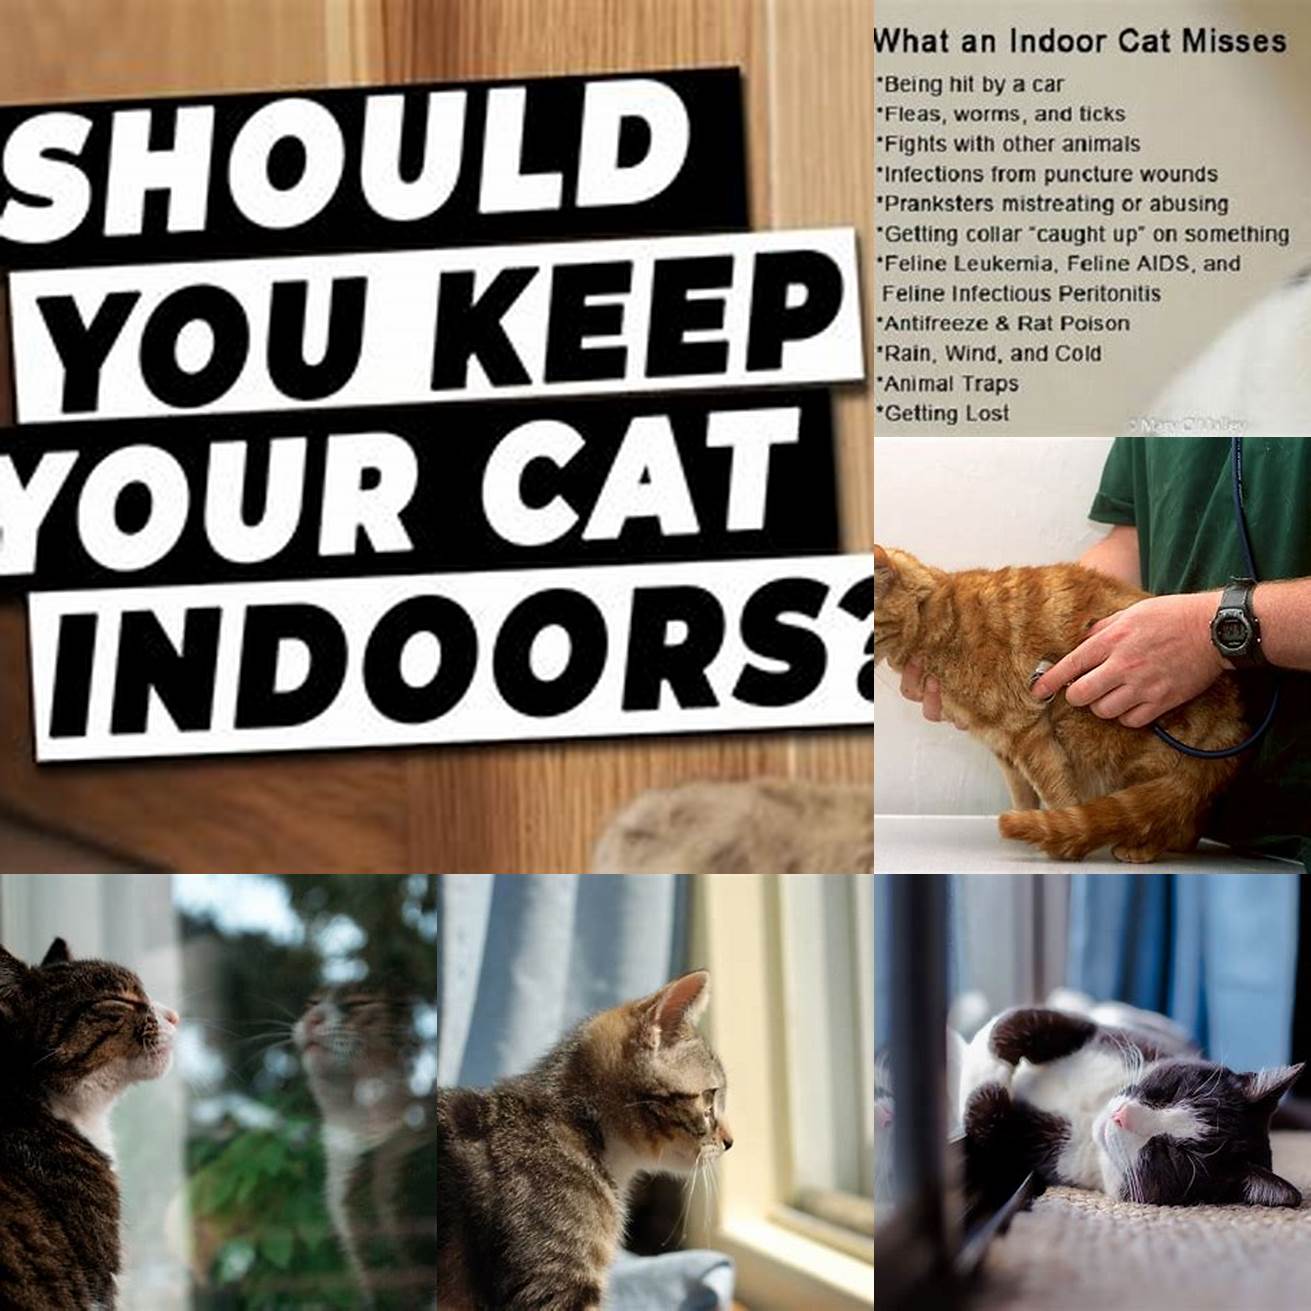 Keep your cat indoors to prevent exposure to diseases